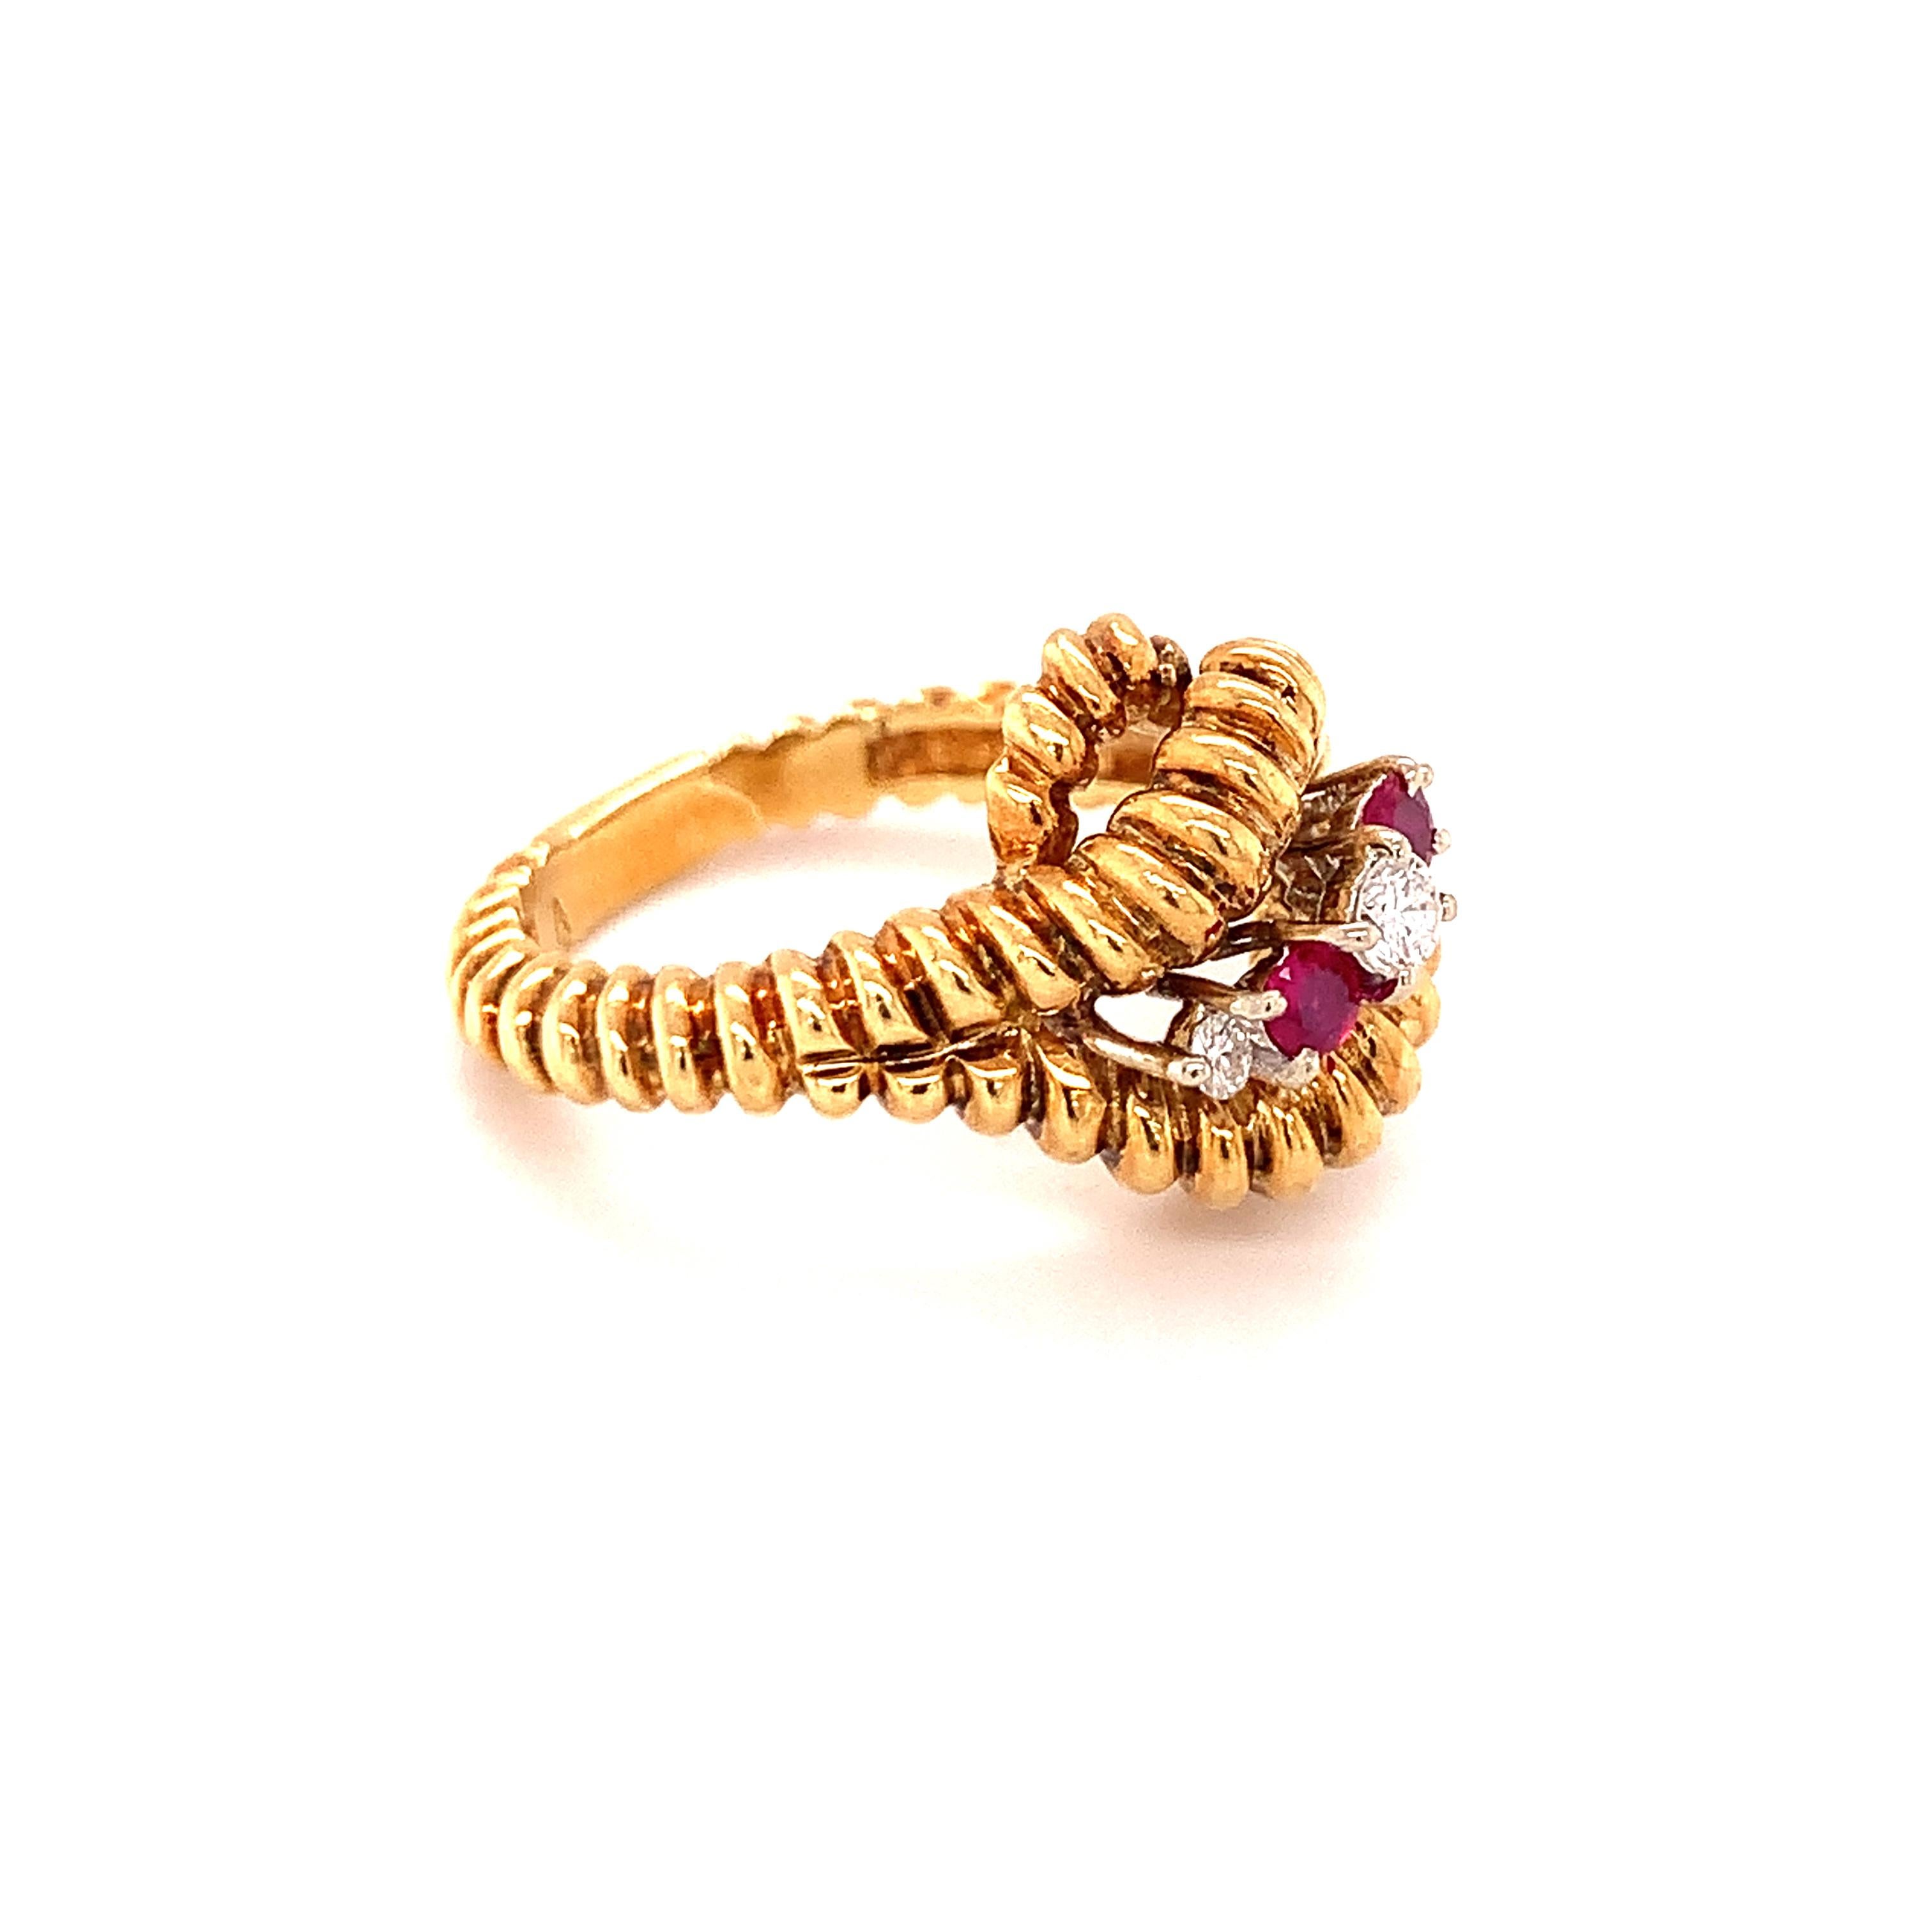 Diamond and ruby 18K yellow gold ring featuring three round brilliant cut diamonds totaling 0.20 ct. with H color and SI-1 clarity and two round brilliant cut rubies totaling 0.18 ct. The ring features a puffed, ribbed gold design throughout the